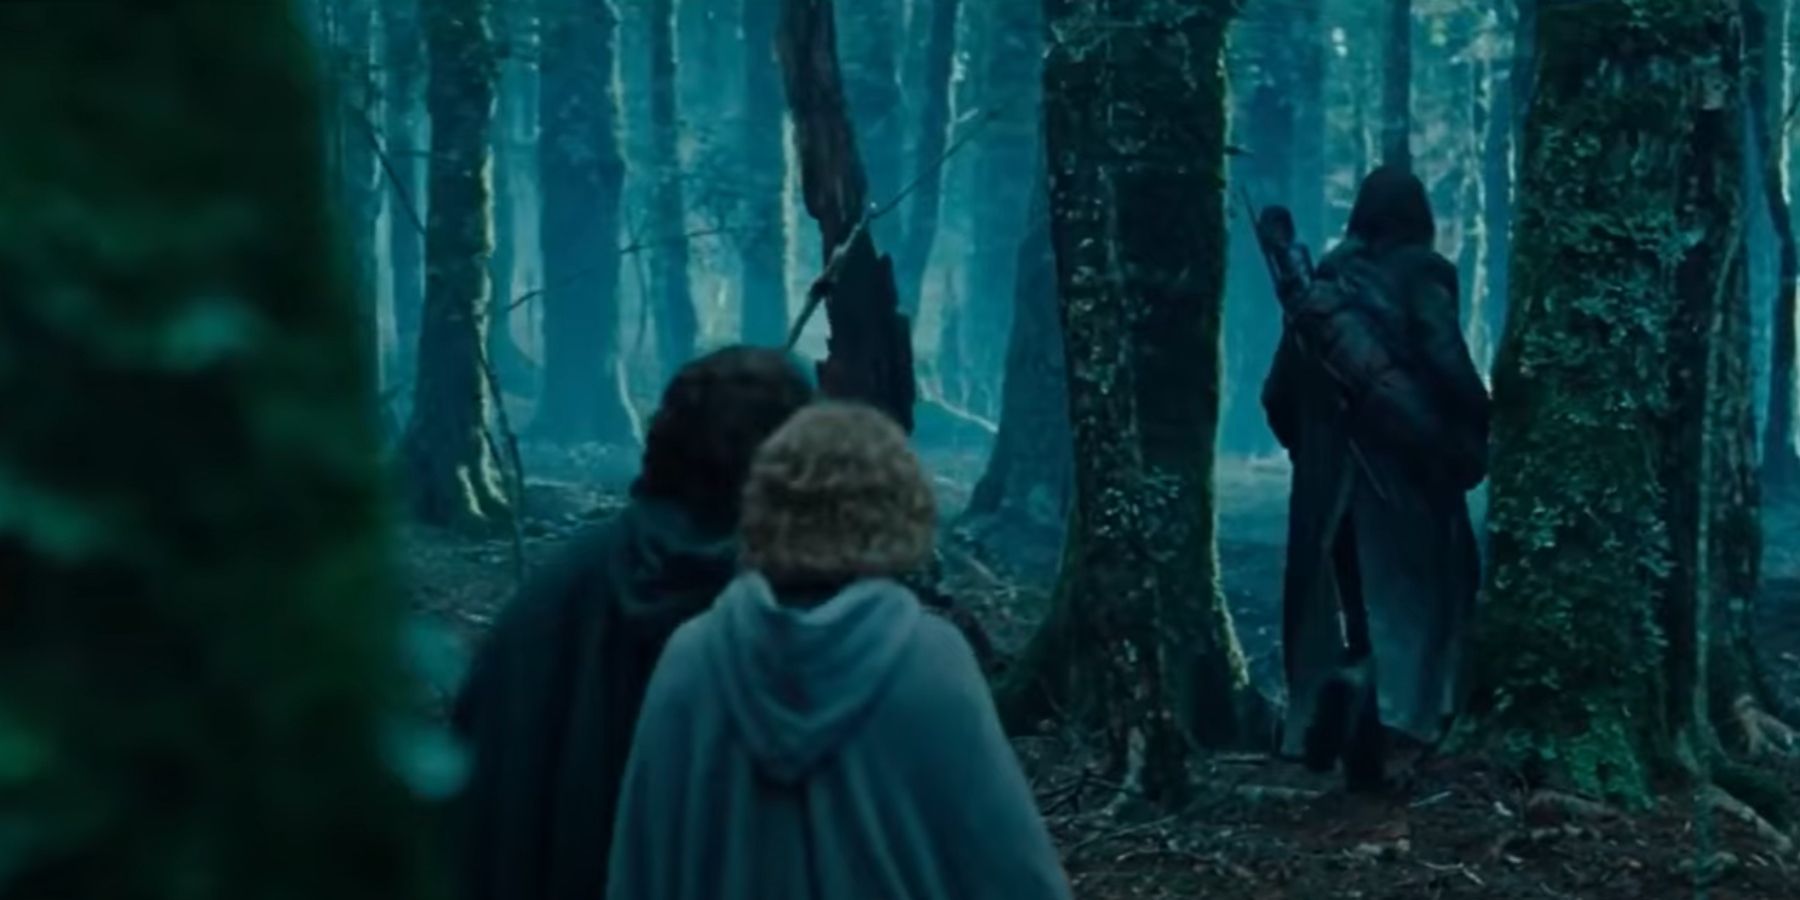 Aragorn leads the hobbits through the woods